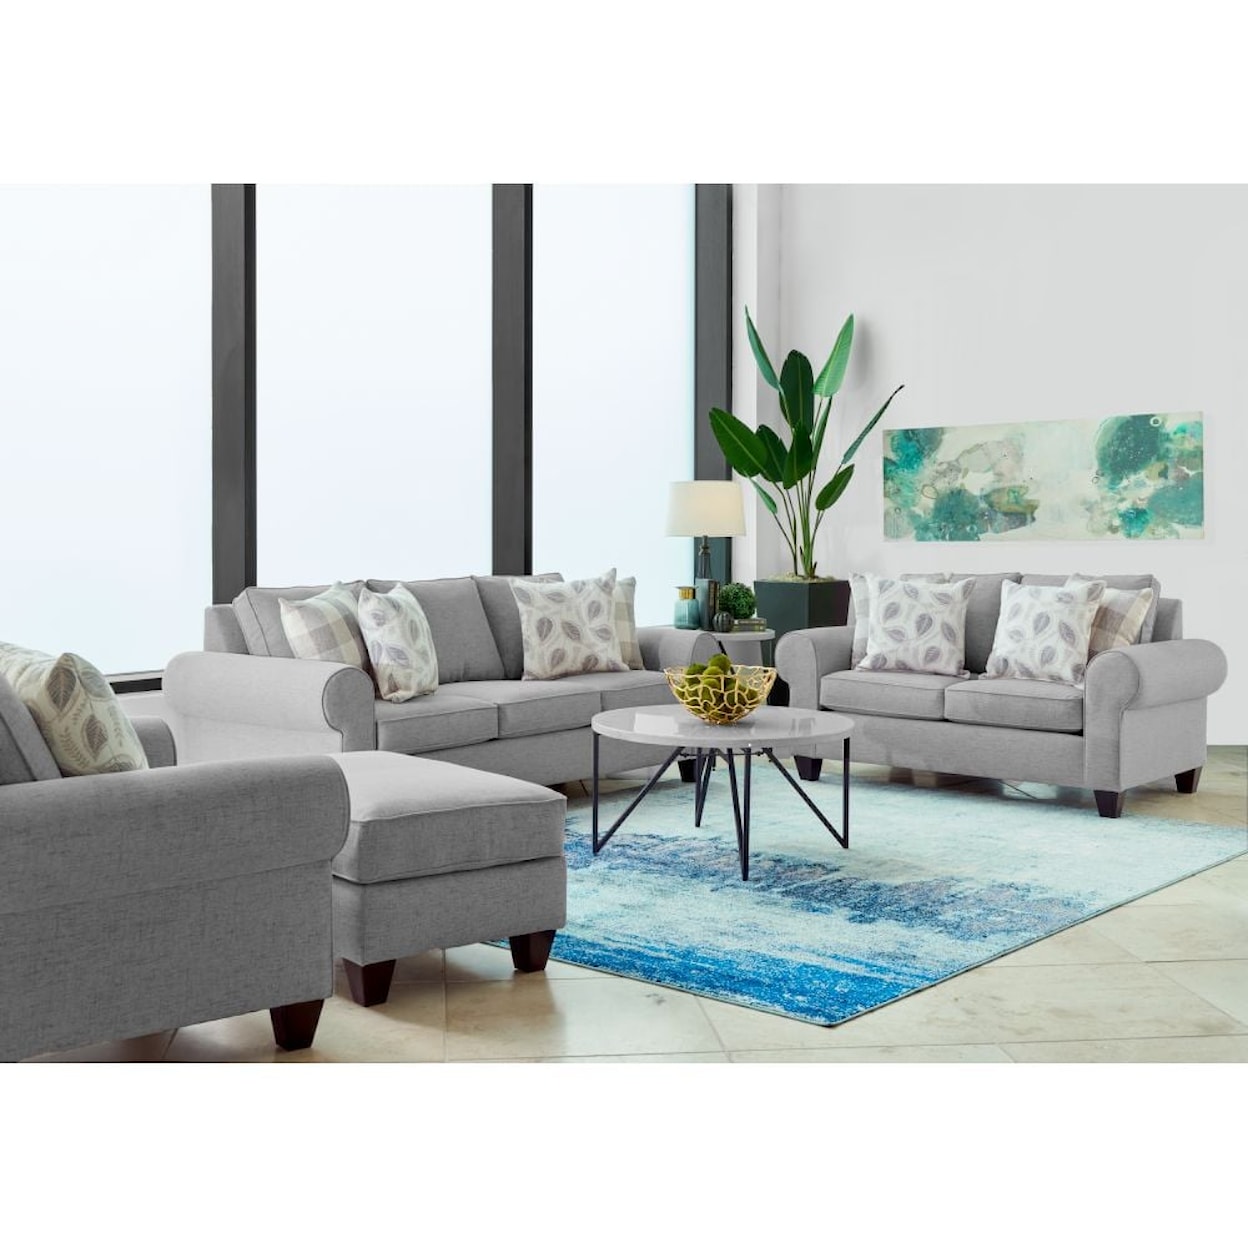 Elements International 705  Loveseat with Rolled Arms